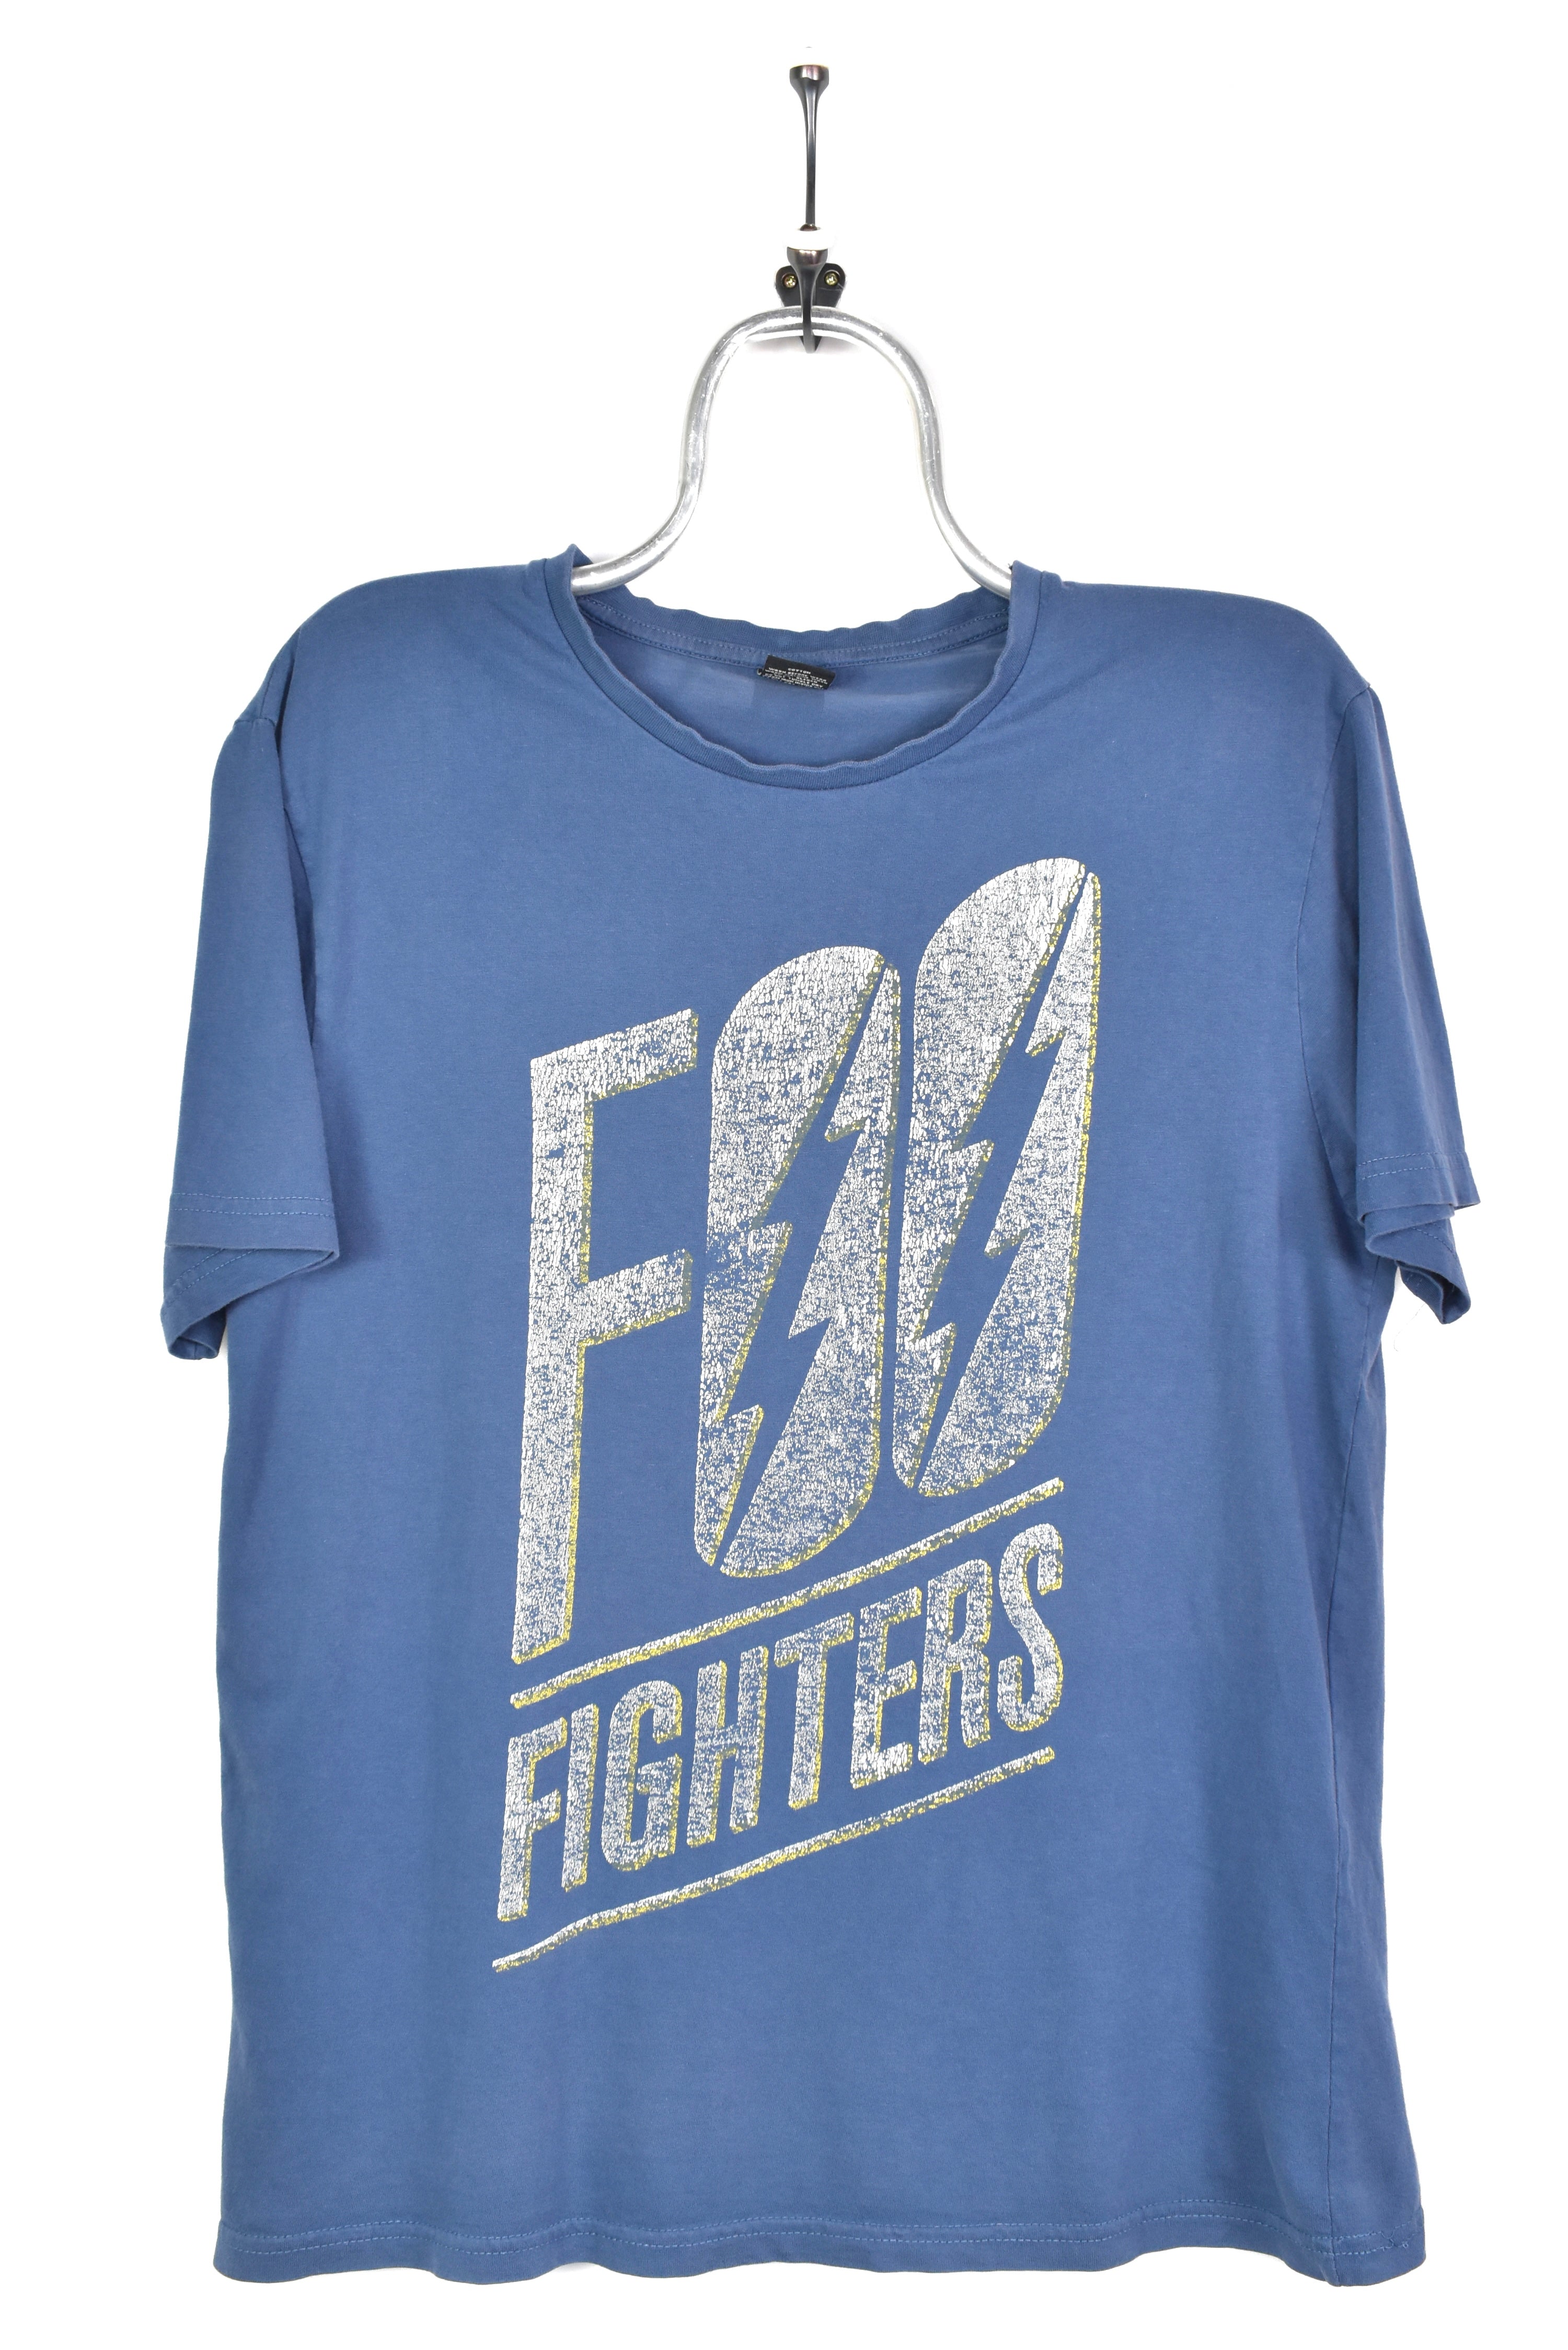 MODERN FOO FIGHTERS NAVY BAND T-SHIRT | LARGE BAND